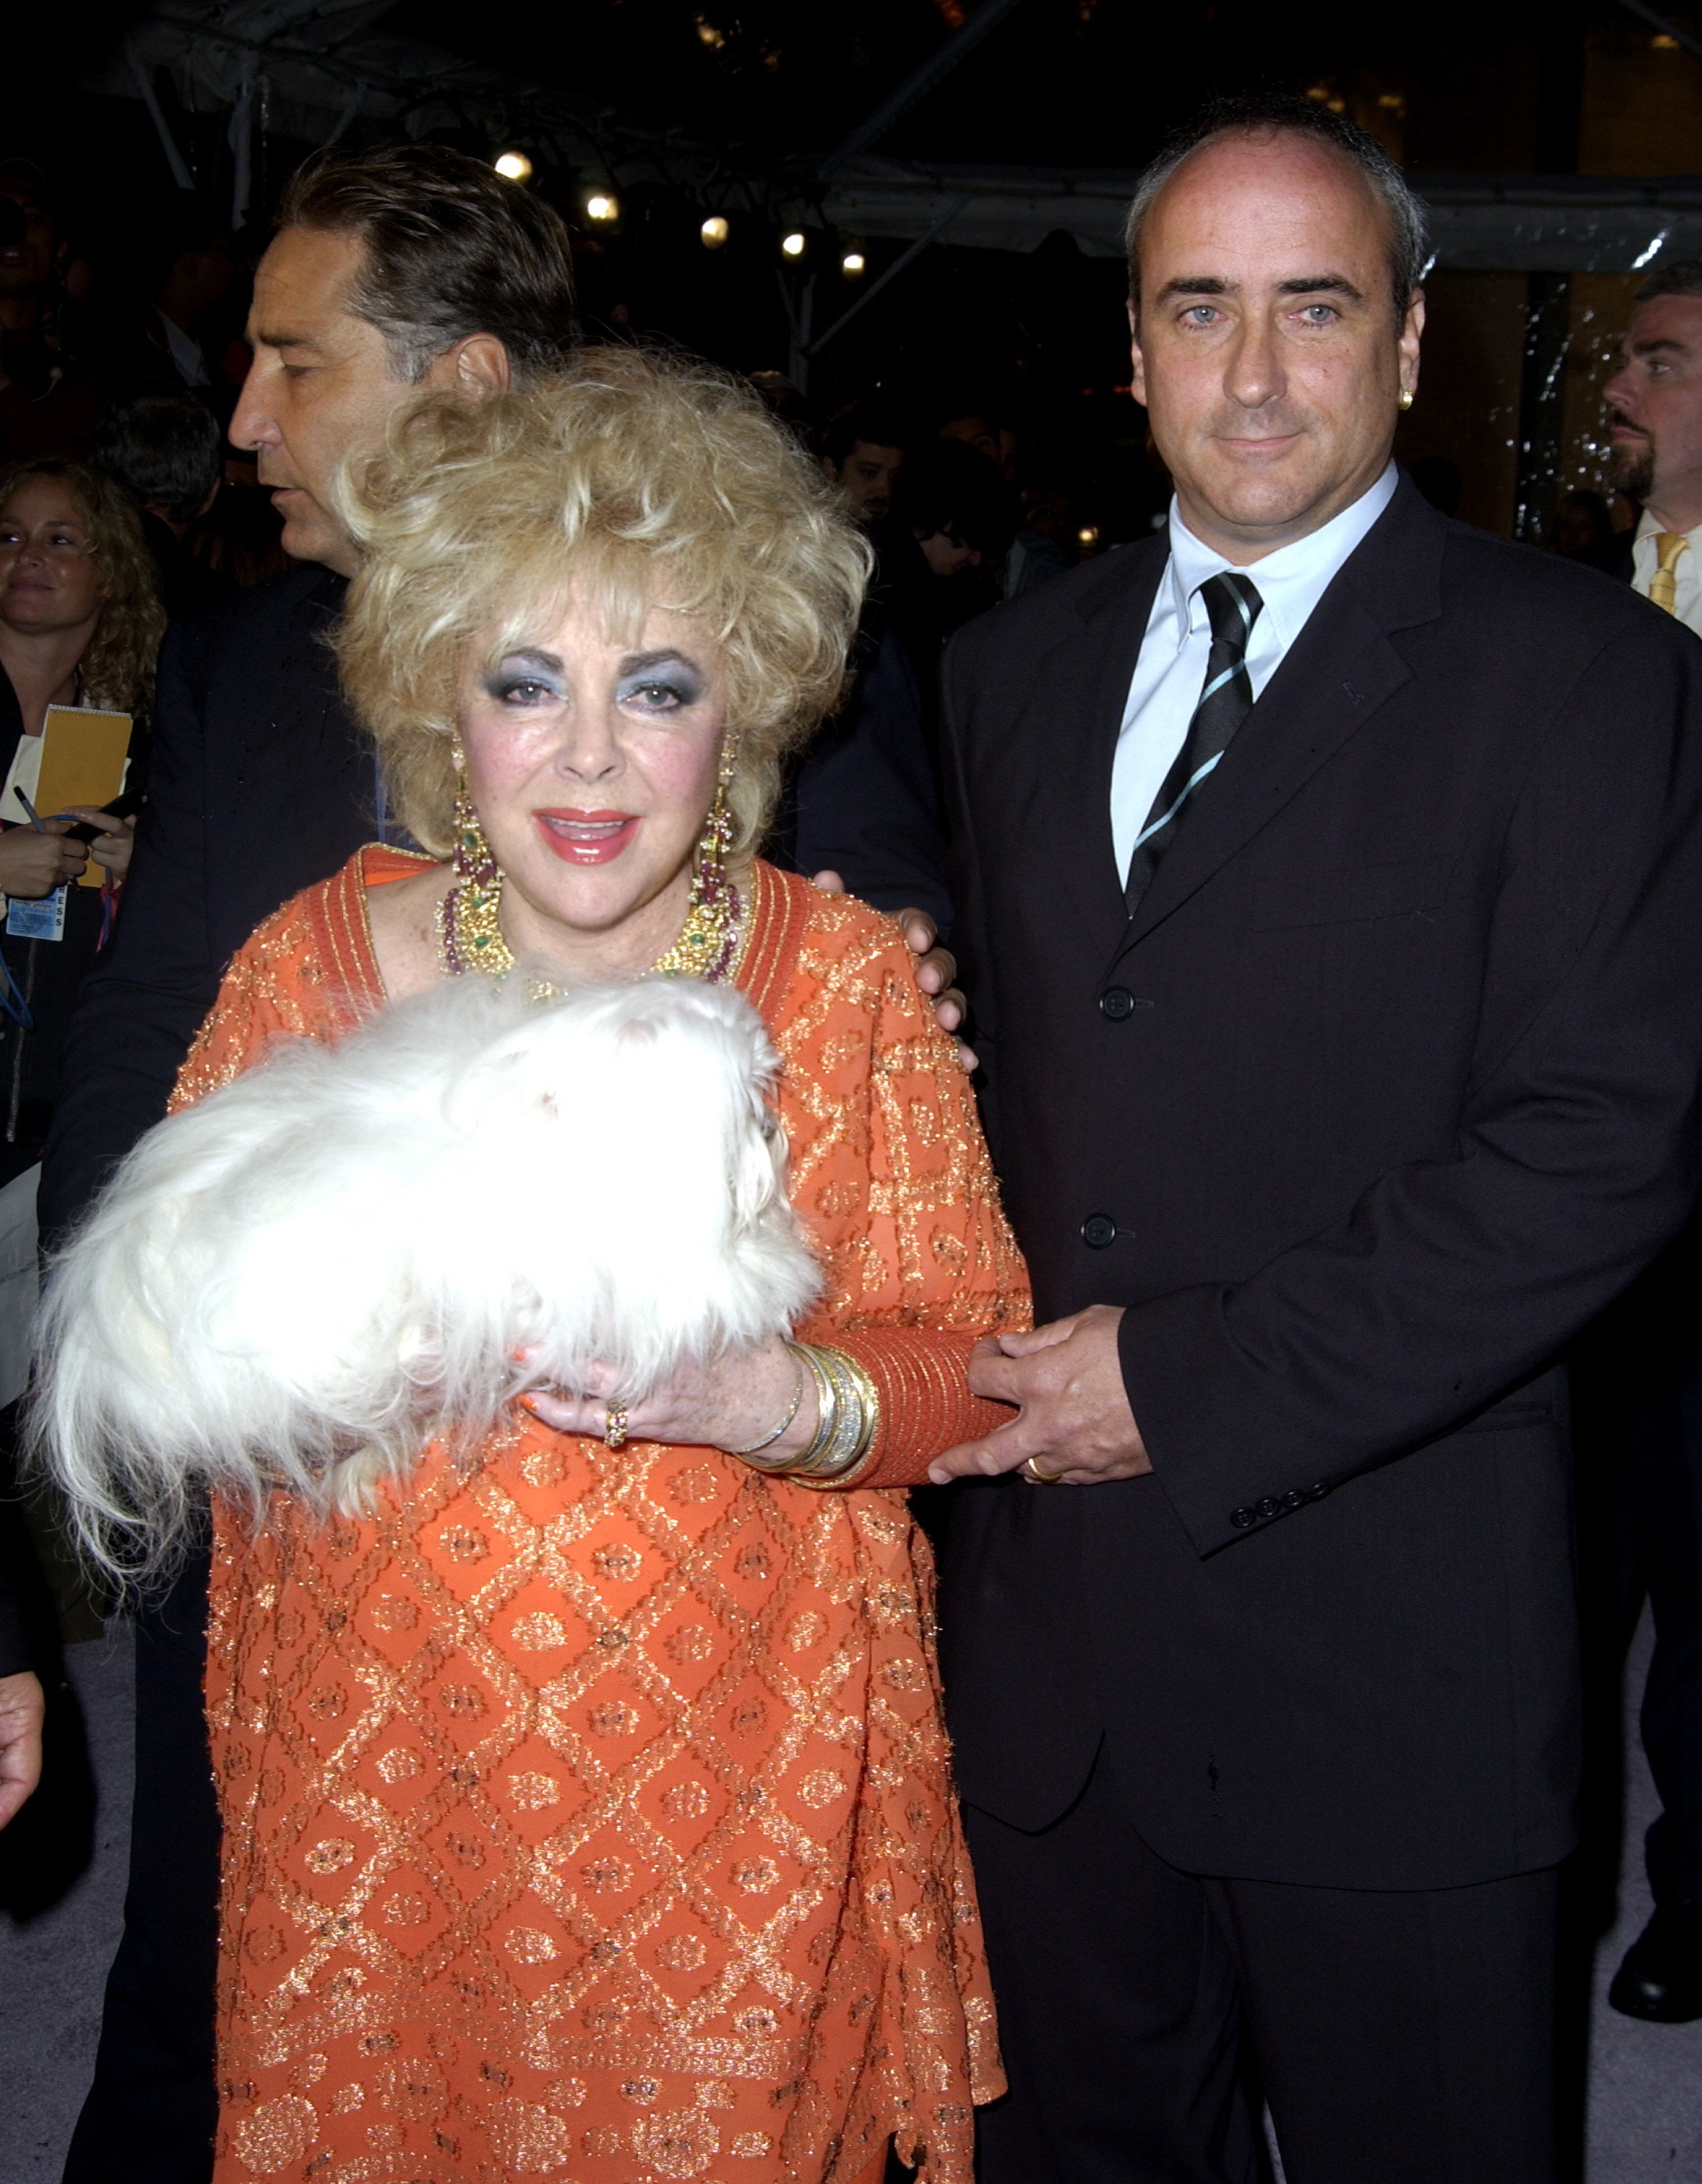 Elizabeth Taylor and son Christopher Wilding attend the InStyle Magazine Gala for the release of "Elizabeth Taylor: My Love Affair with Jewelry" at Christie's on September 26, 2002, in New York City, New York. | Source: Getty Images